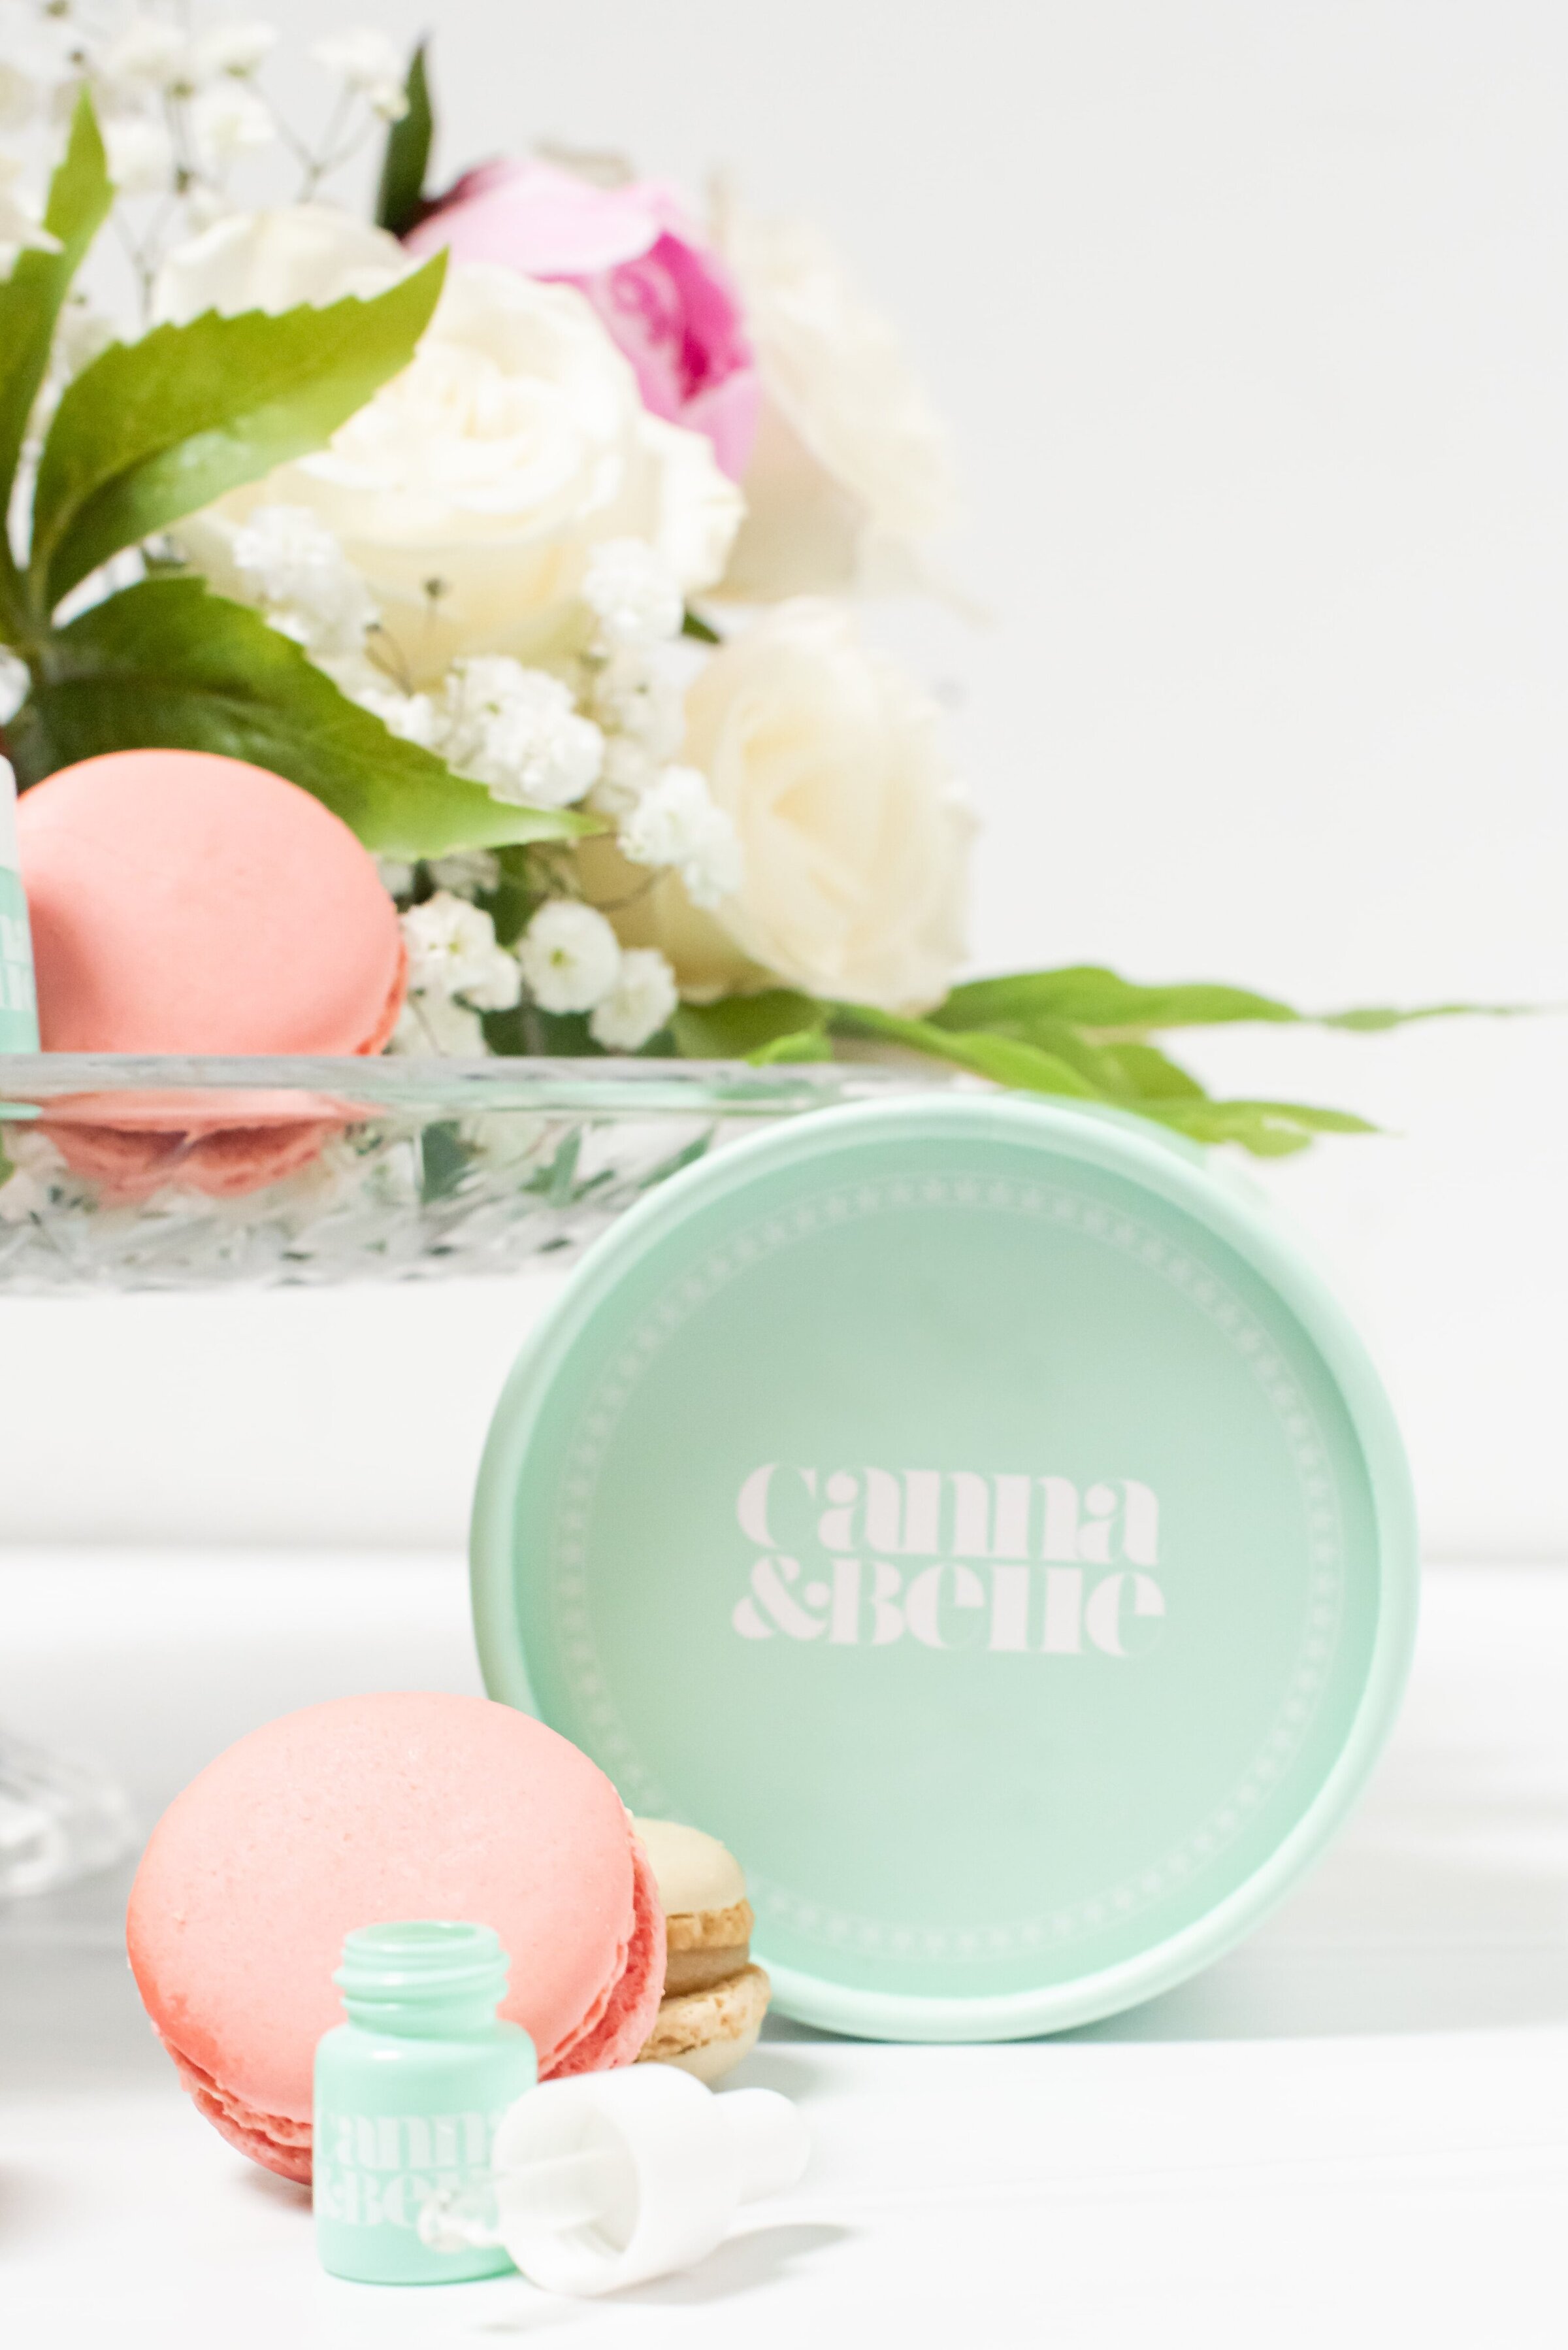 CBD drops styled with flowers and macarons